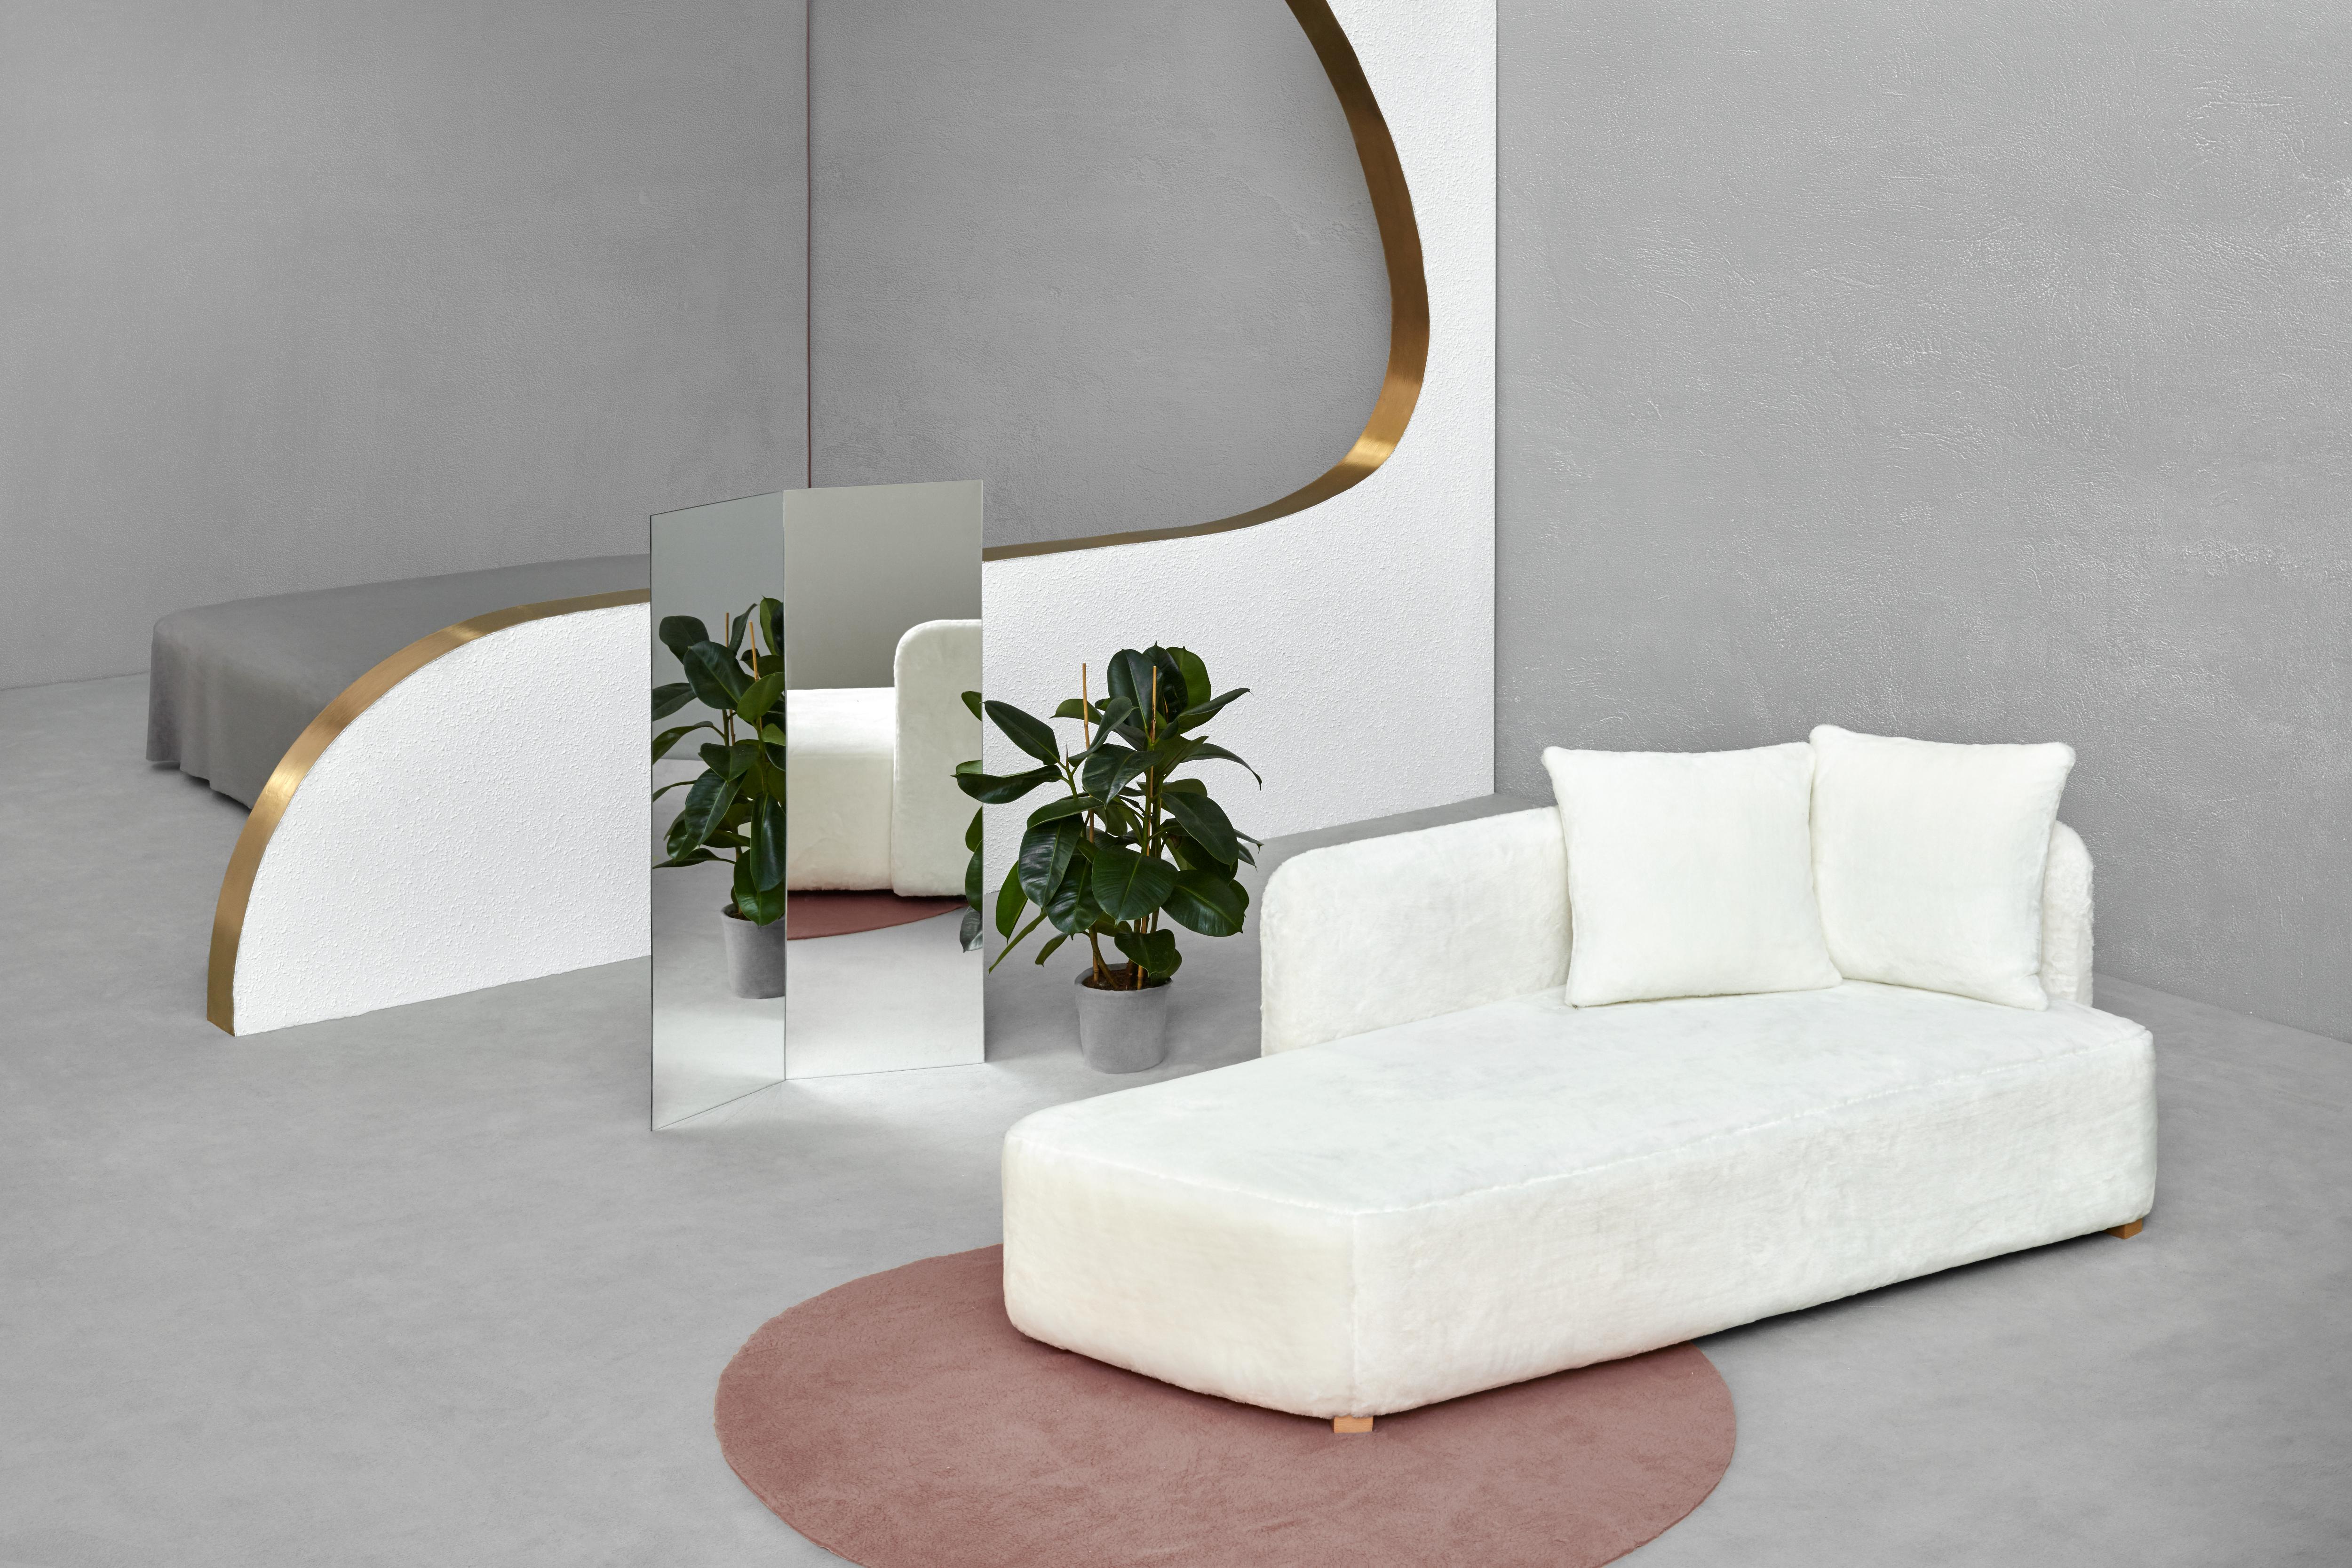 White Edith Daybed by Pepe Albargues
Dimensions: 82 x 85 x 192 cm
Pine wood structure reinforced with plywood and table.
Suspension with springy belts.
Seat stuffed with Bultex and soja covered.
Back cushions stuffed with 50% goose feathers and 50%